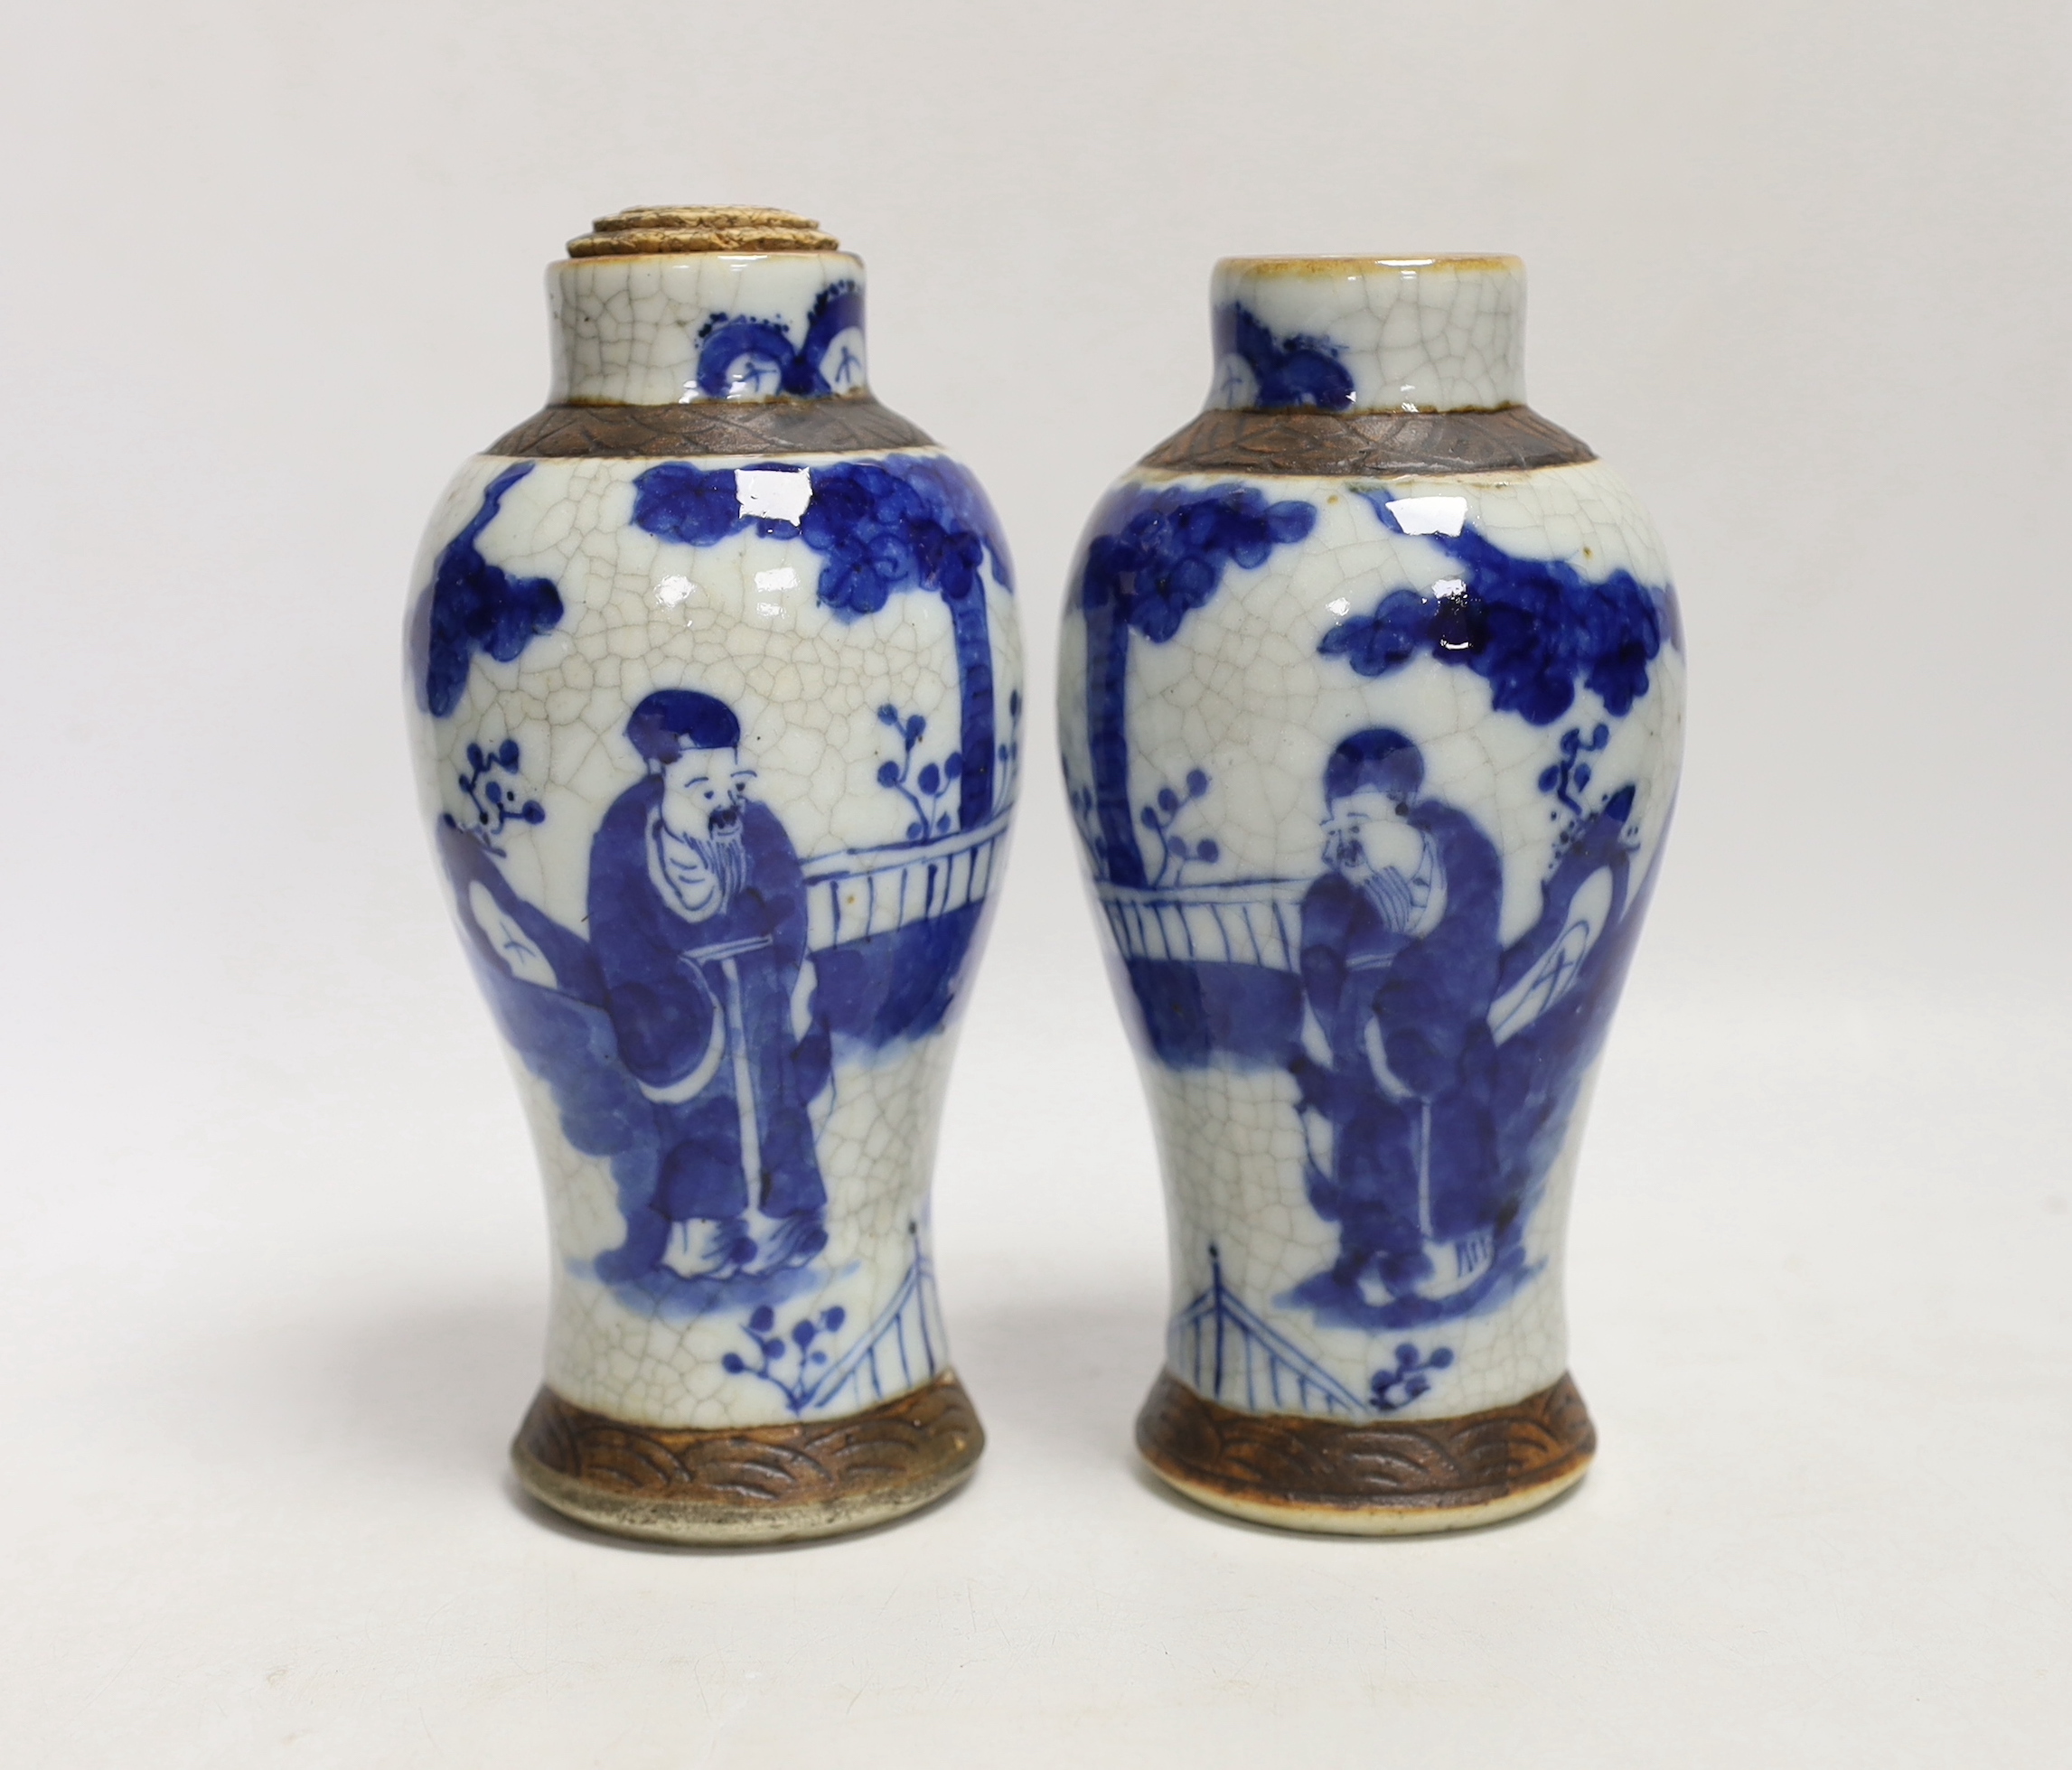 A pair of Chinese blue and white crackle glaze vases, late 19th century, 17cm